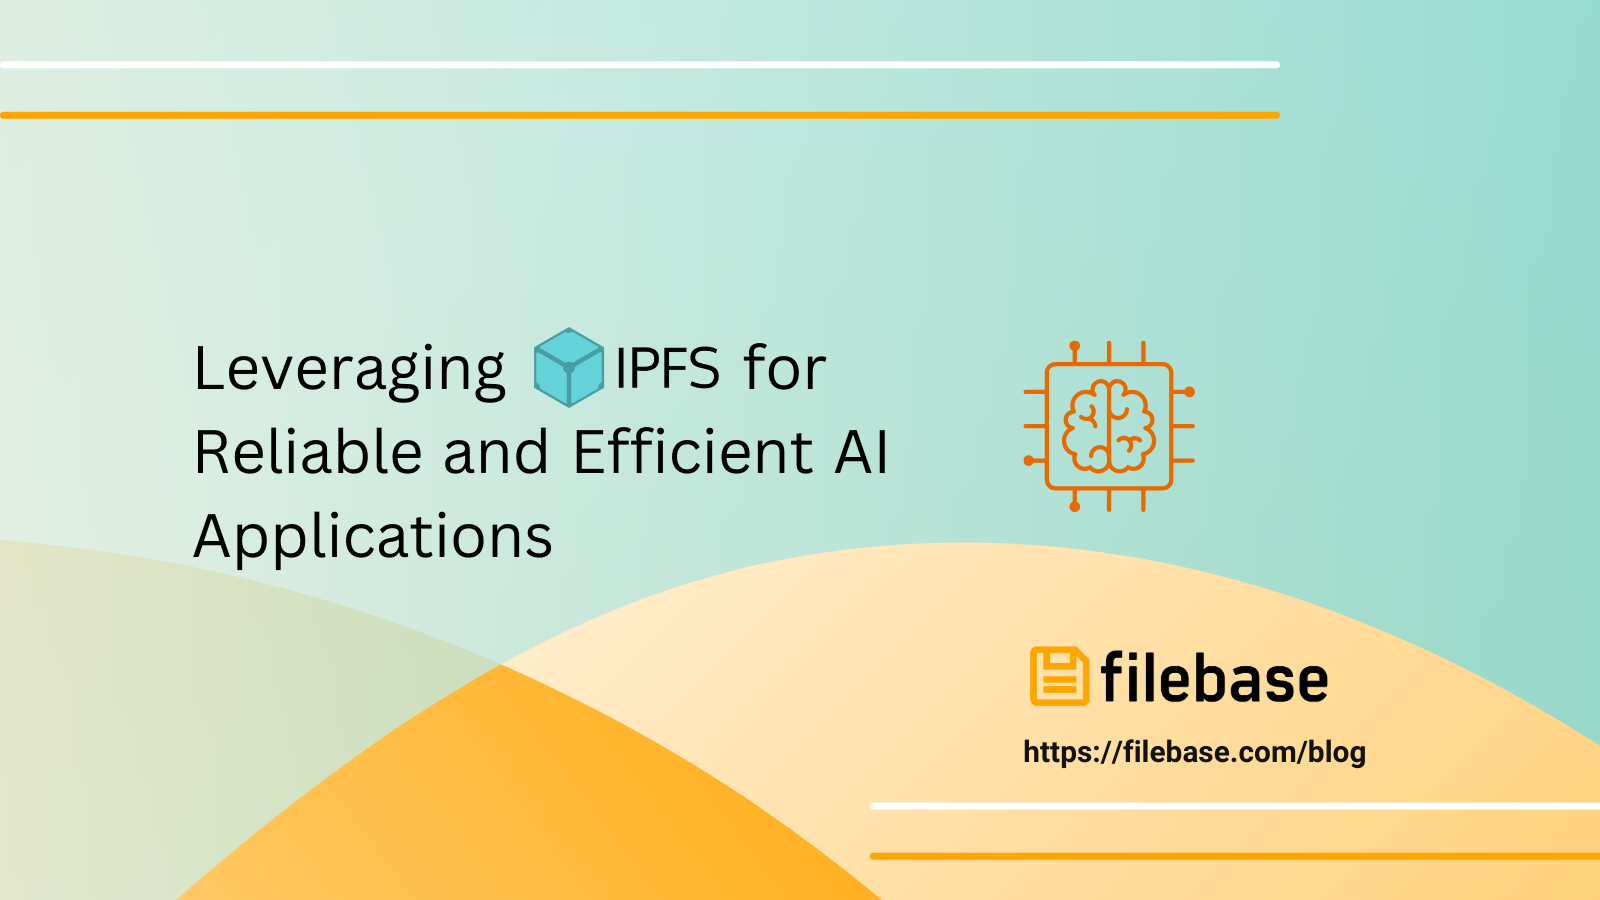 Leveraging IPFS for Reliable and Efficient AI Applications